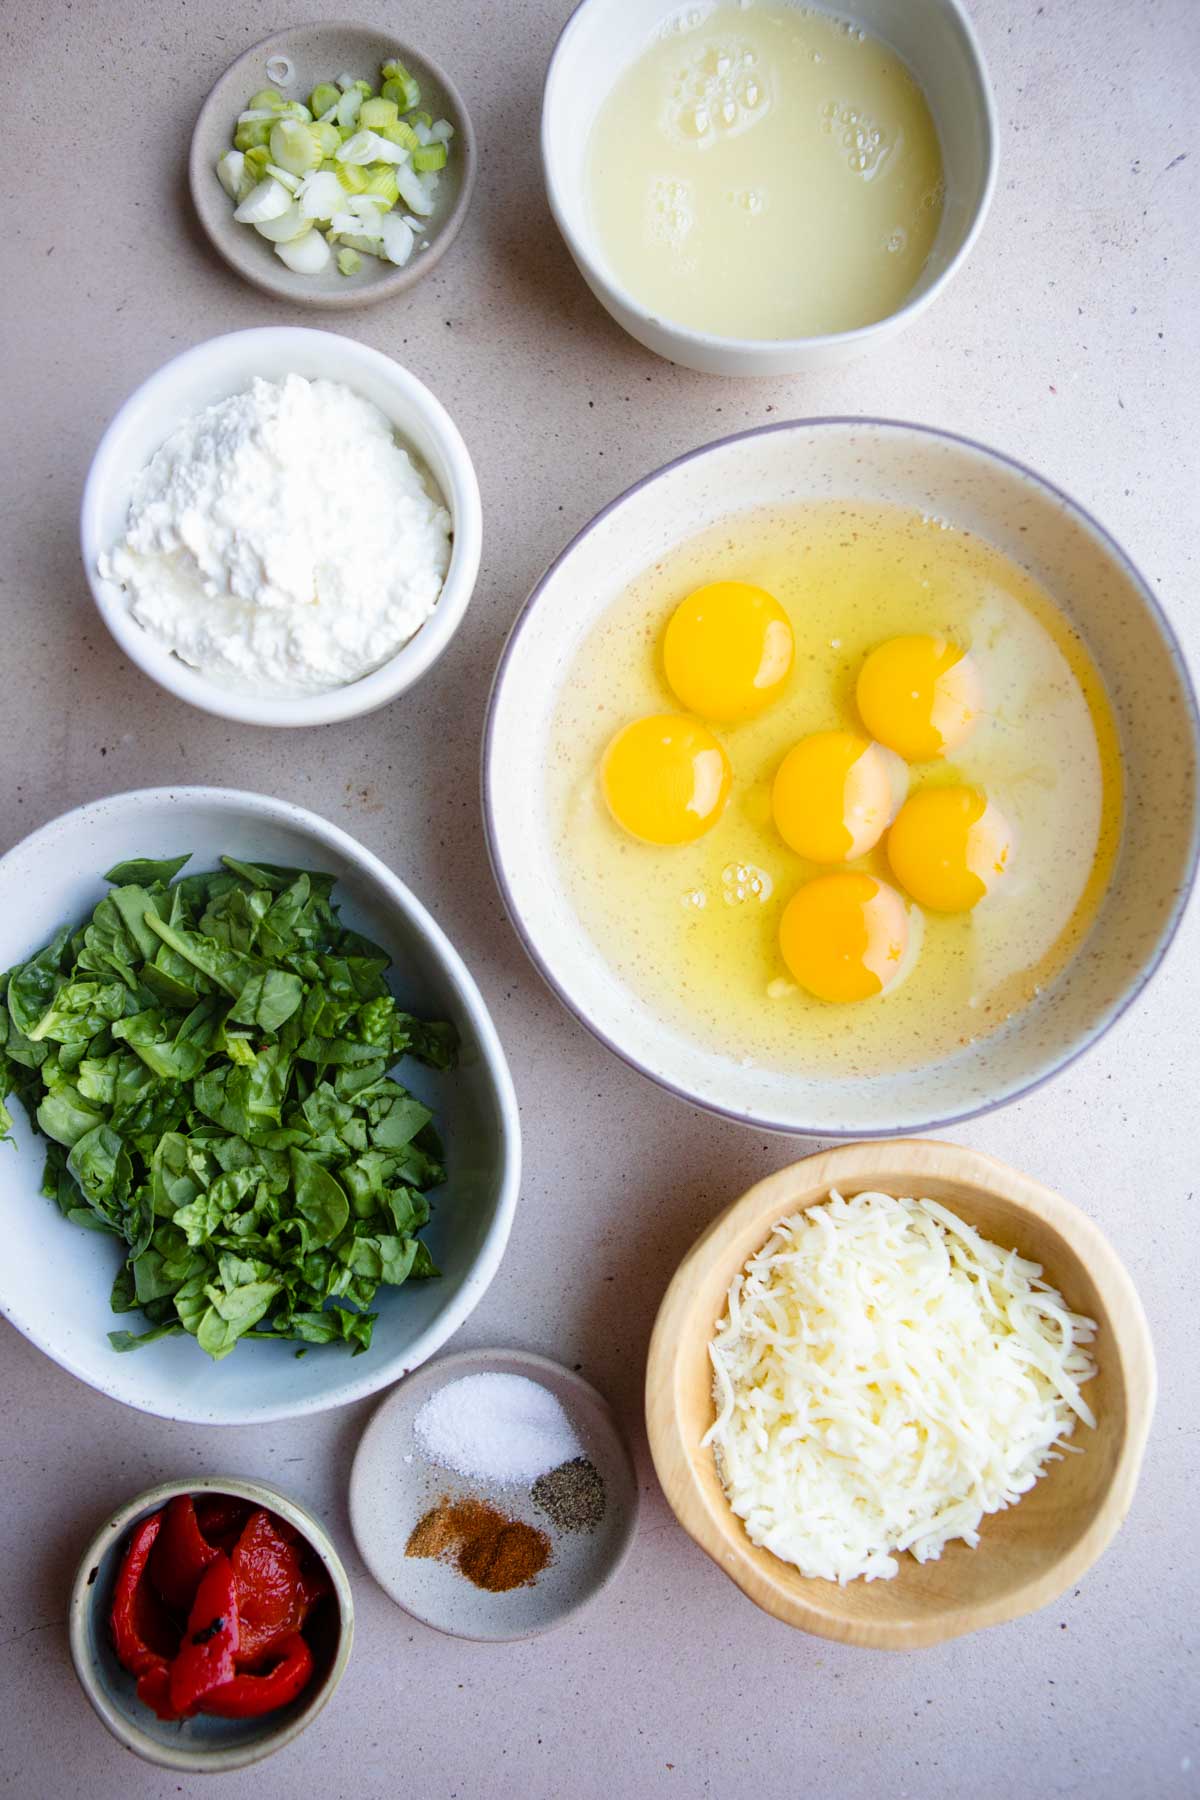 Ingredients shown are used to make soft egg bites.